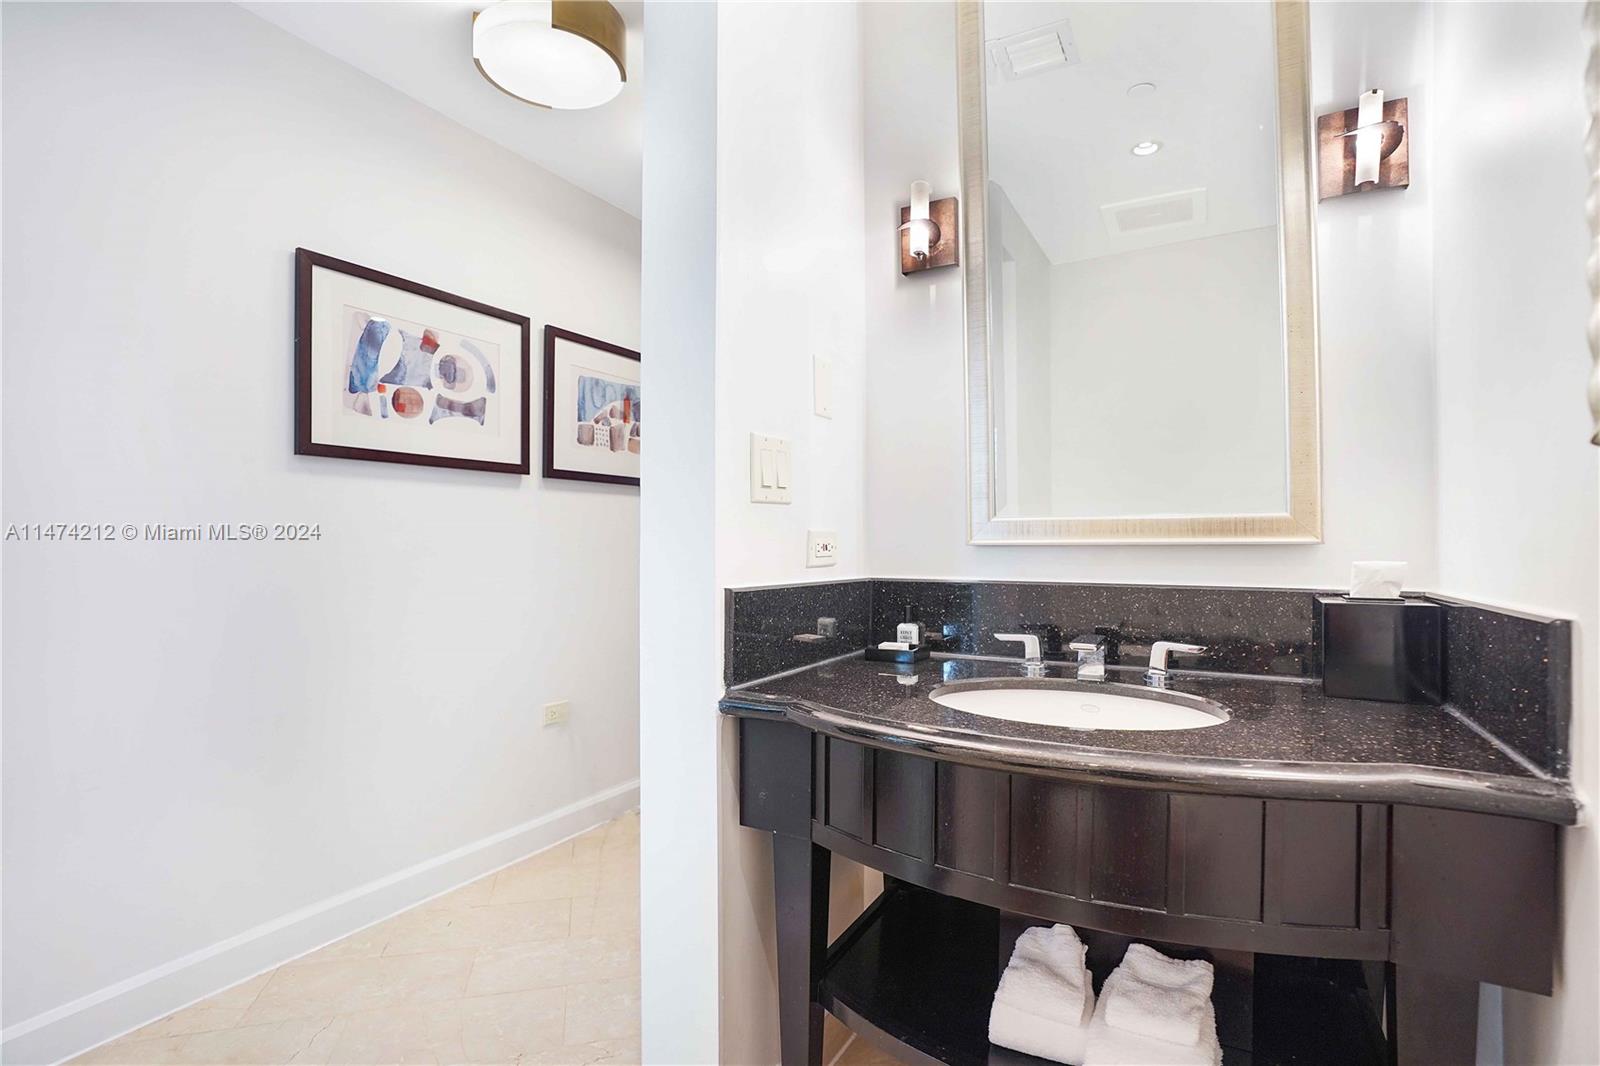 4391 Collins Ave Unit 709, Miami Beach, Florida, 33140, United States, 1 Bedroom Bedrooms, ,2 BathroomsBathrooms,Residential,For Sale,4391 Collins Ave Unit 709,1394803